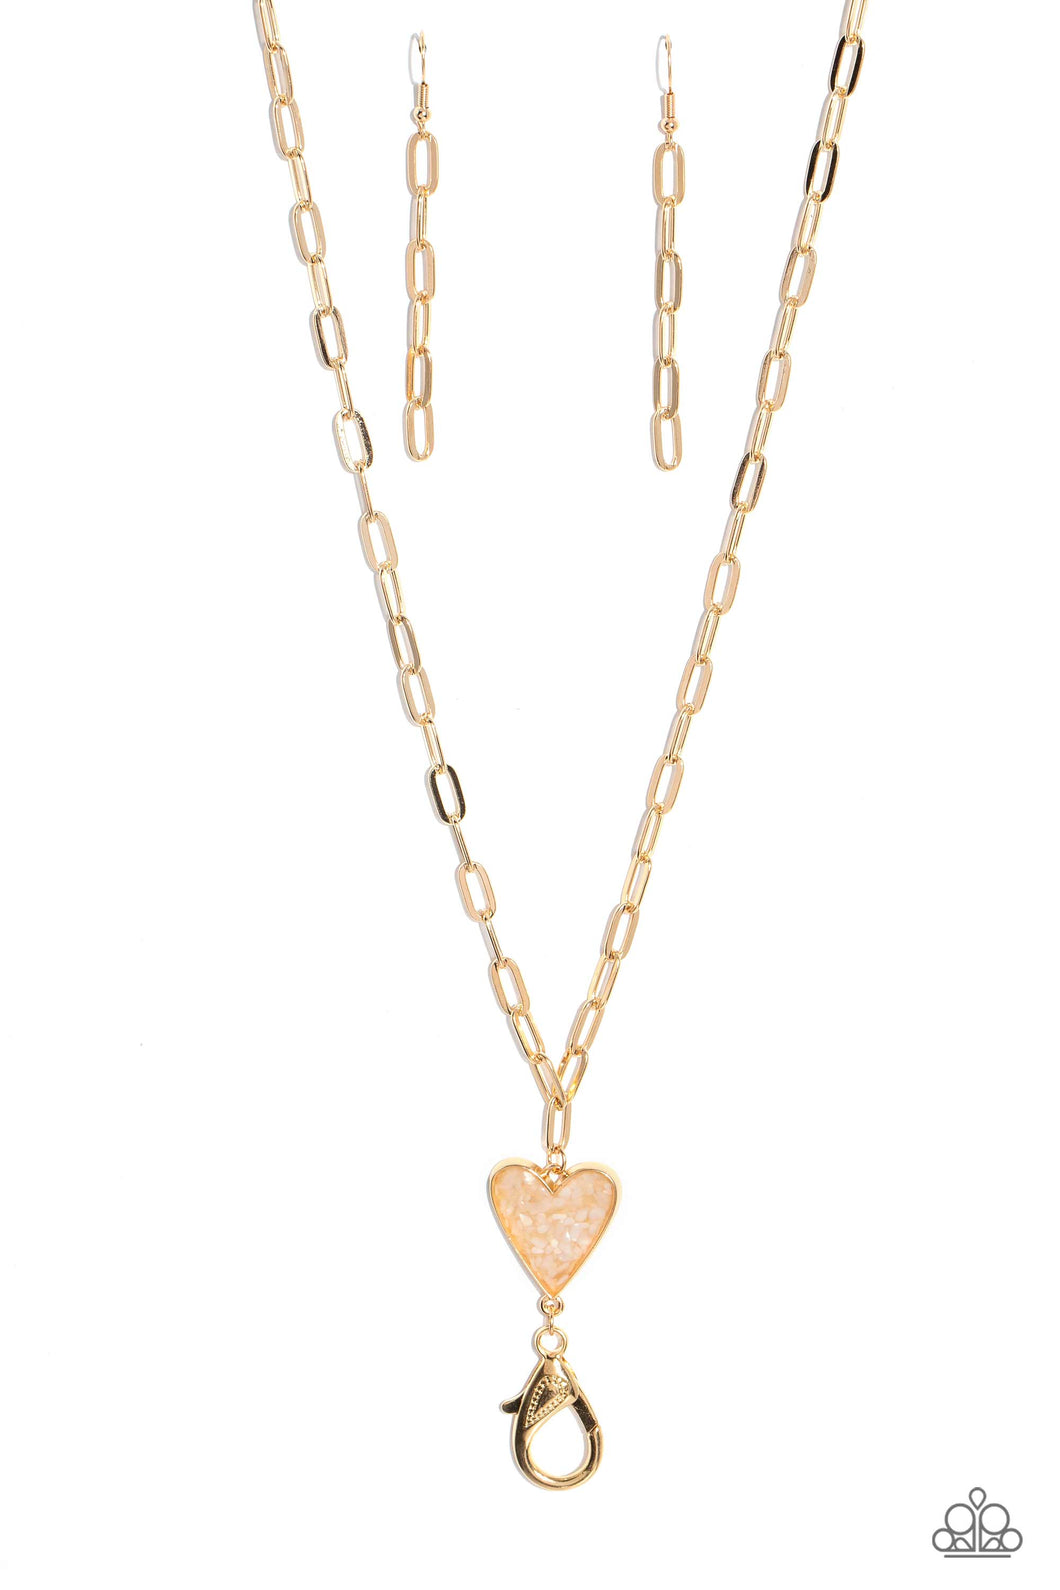 Kiss and SHELL - Gold (Heart Lanyard) Necklace